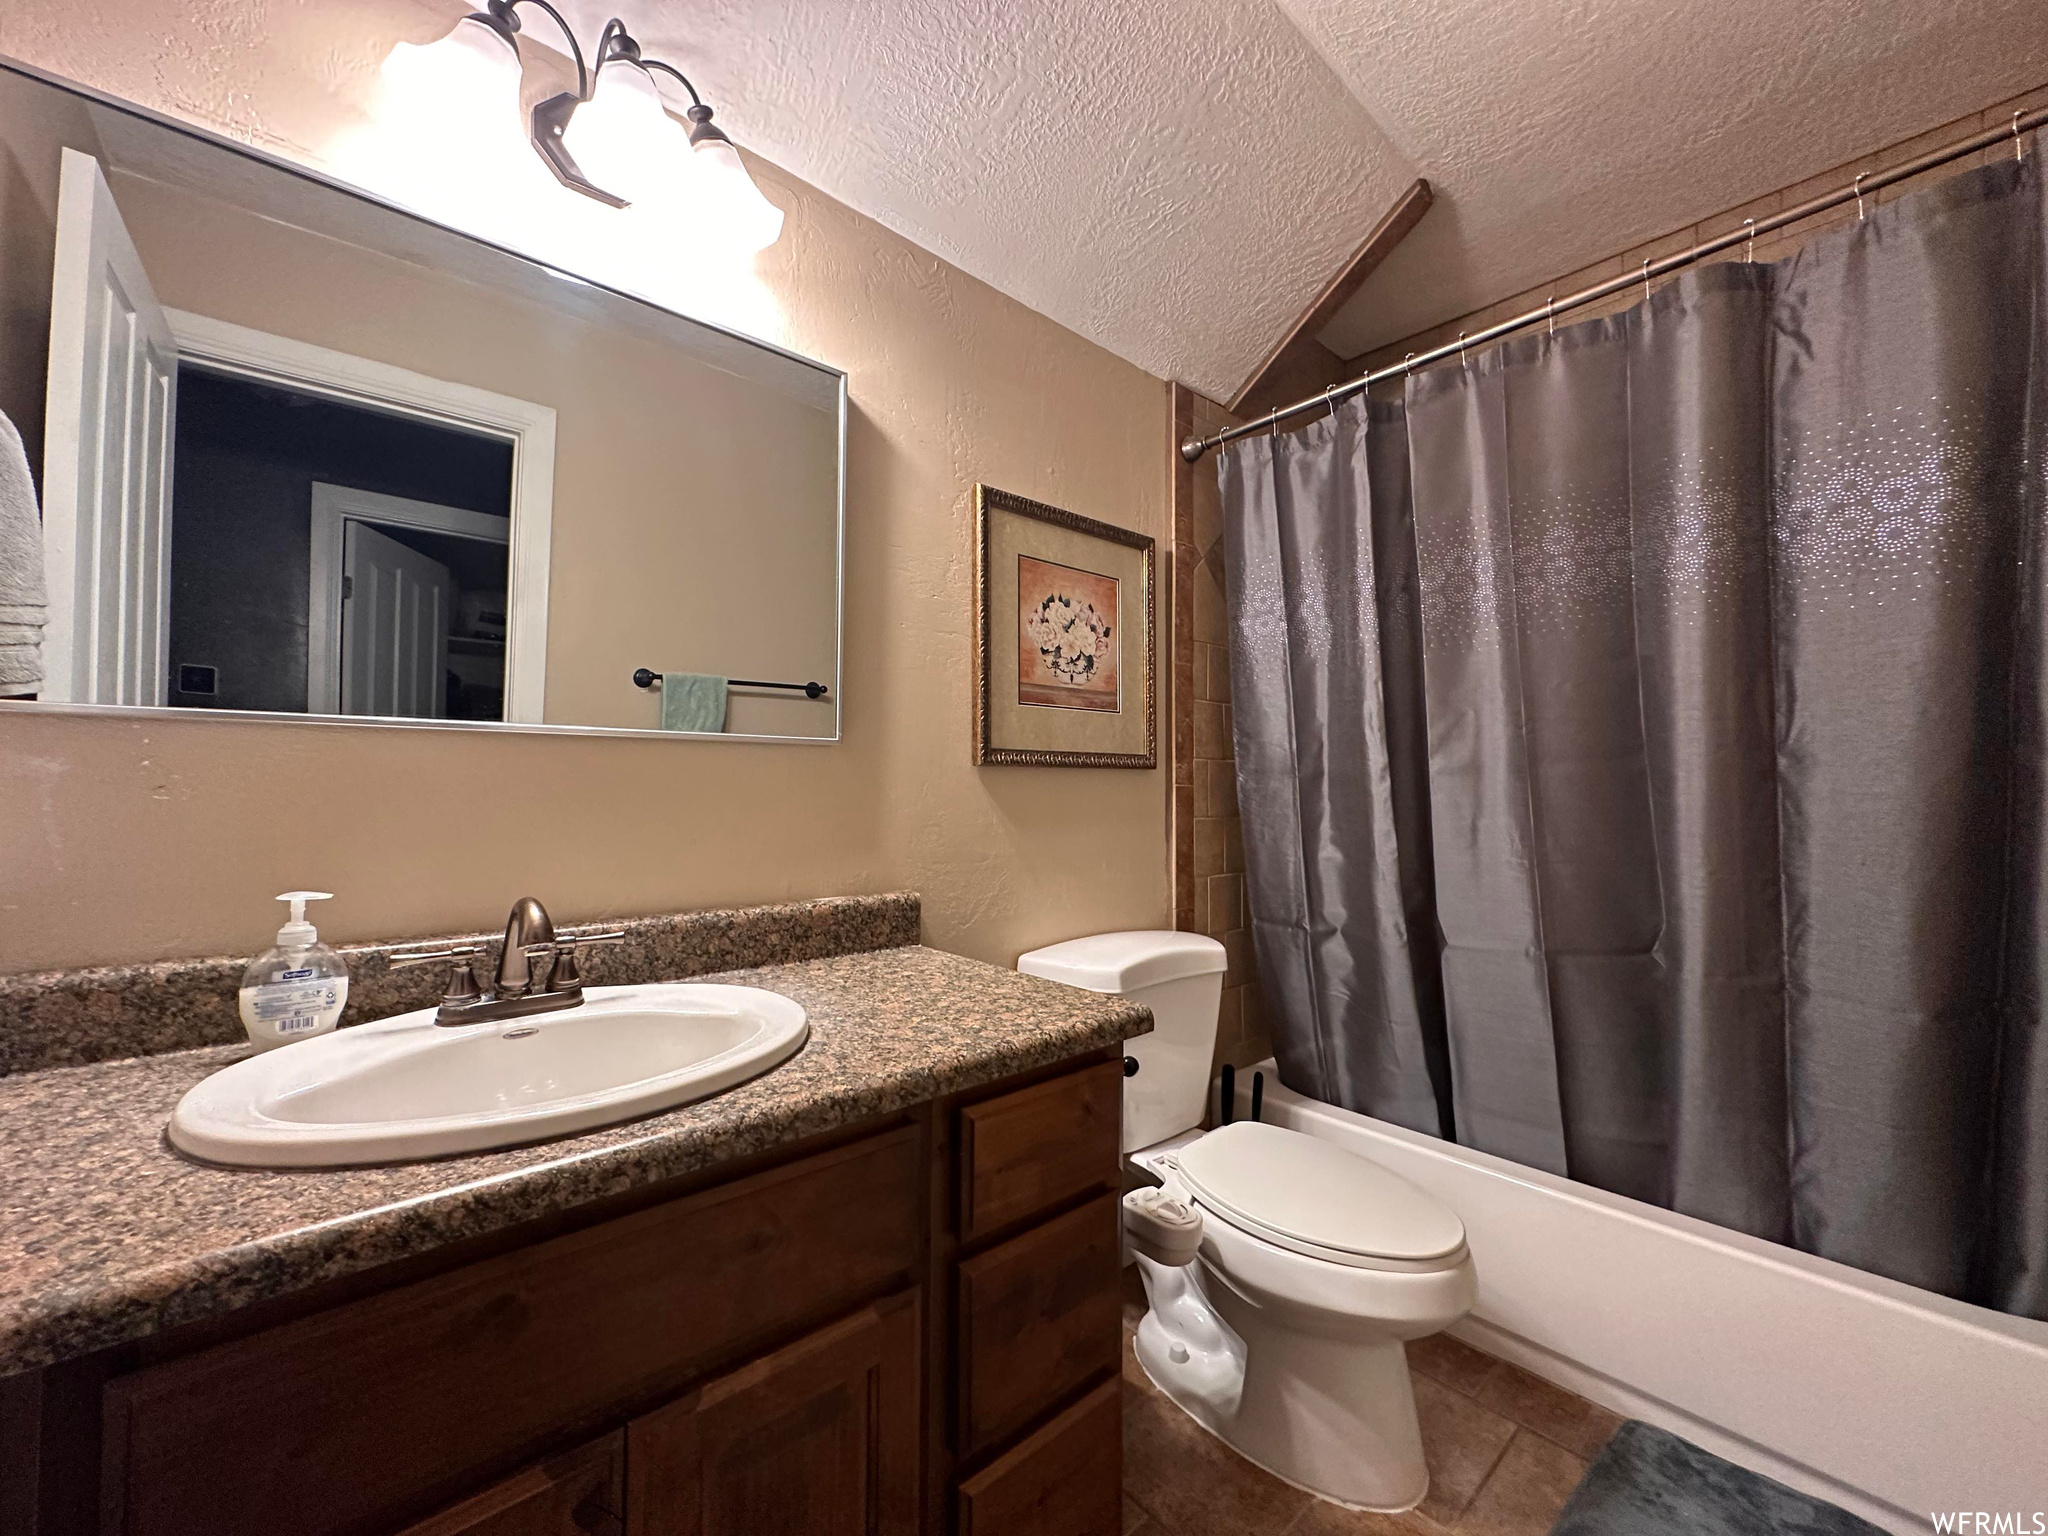 Full bathroom with toilet, a textured ceiling, tile floors, oversized vanity, and shower / tub combo